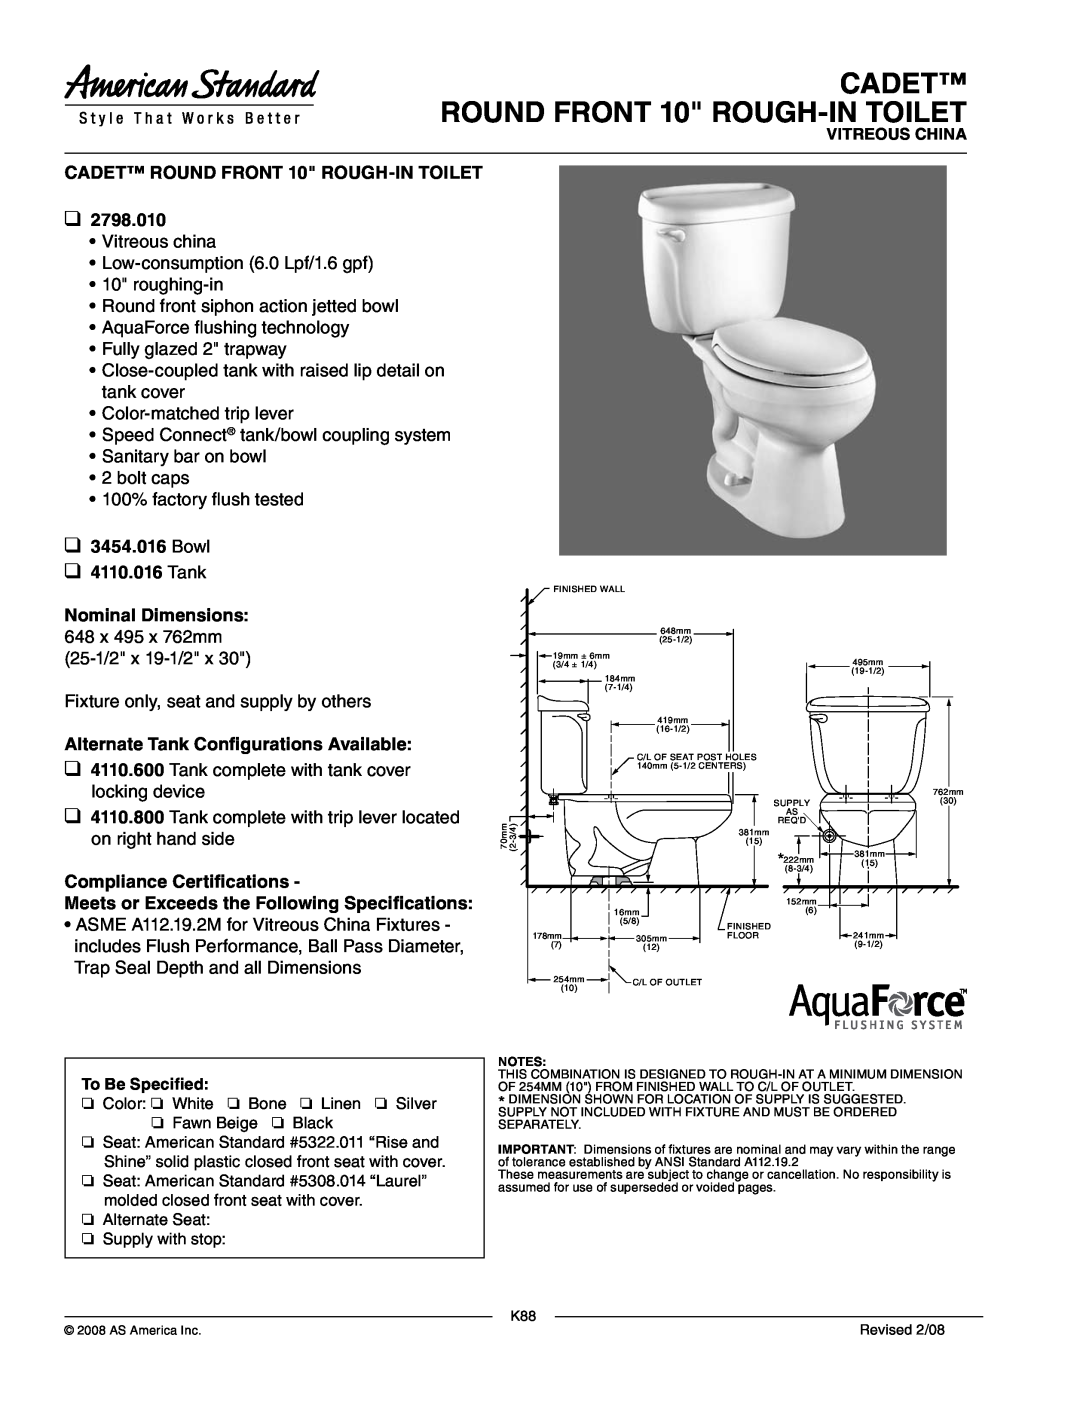 American Standard 2798.010 dimensions CADET ROUND FRONT 10 ROUGH-INTOILET, Bowl 4110.016 Tank, Nominal Dimensions 